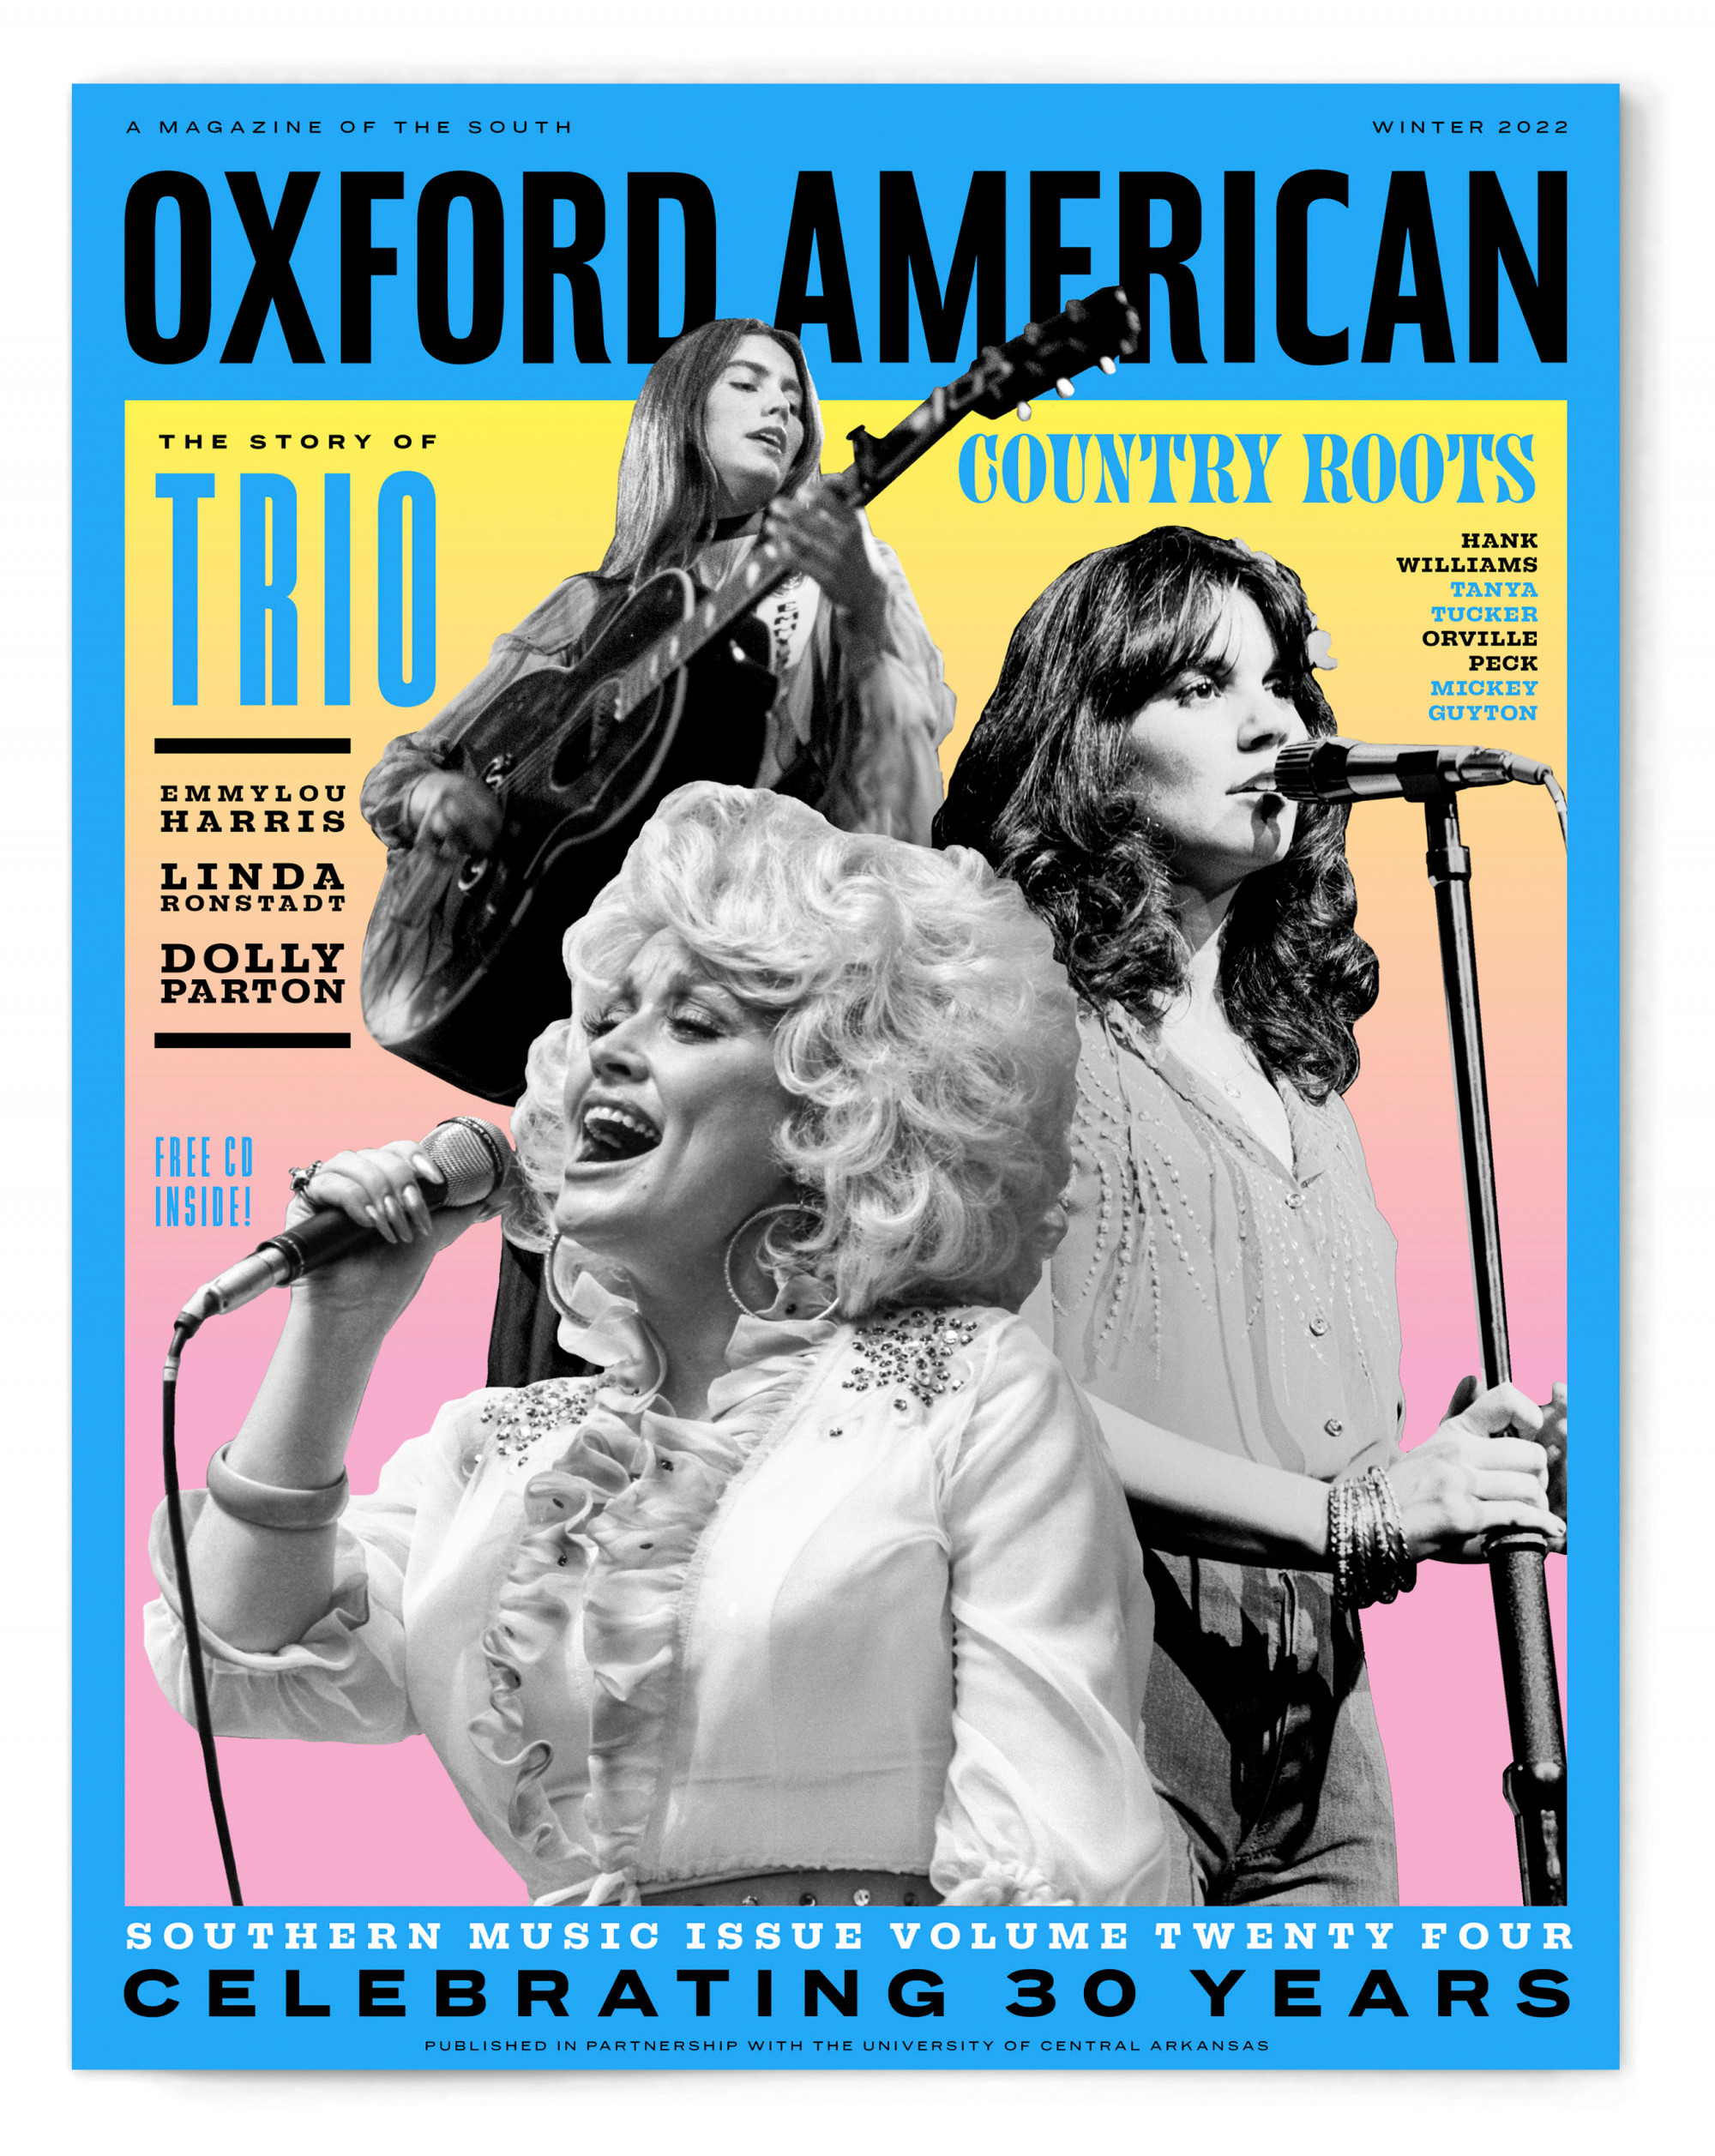 https://oxfordamerican.org/media/pages/web-only/introducing-the-country-roots-music-issue/f77f8e3c3d-1668696536/oa119_winter2022_cover_f_clean_shadow_300.jpg